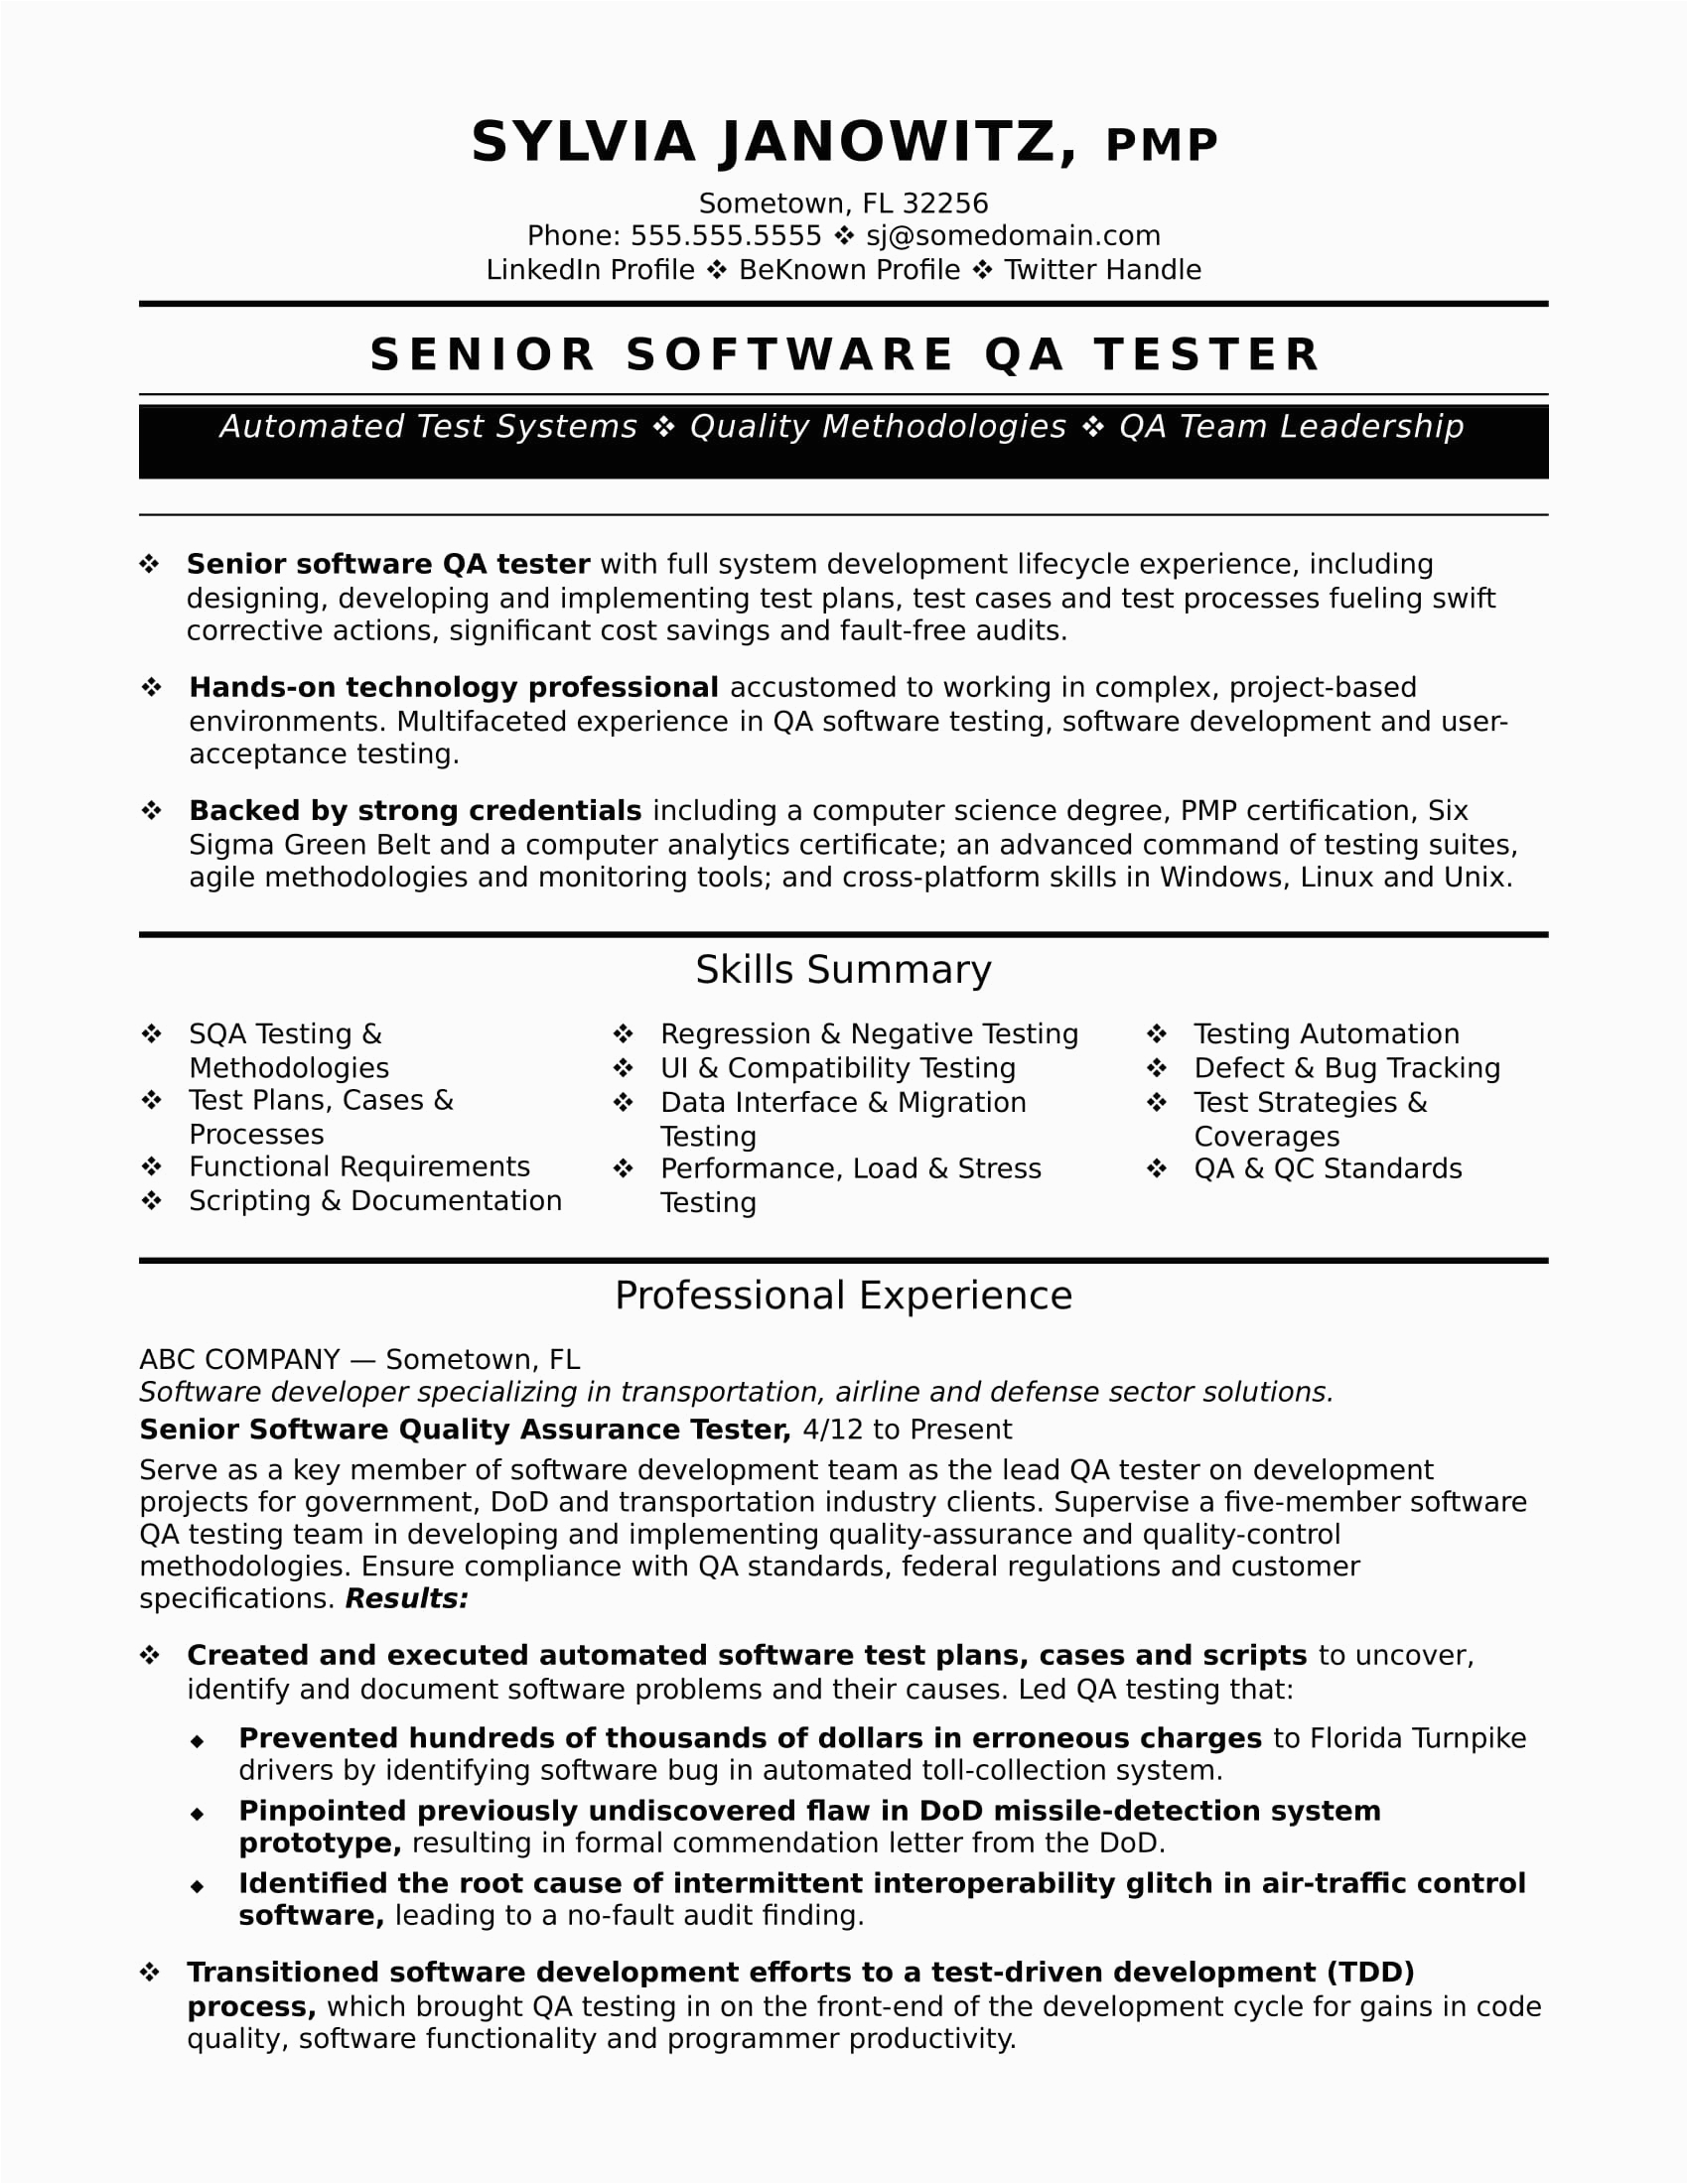 Test Analyst In Wallmart Sample Resumes Experienced Qa software Tester Resume Sample